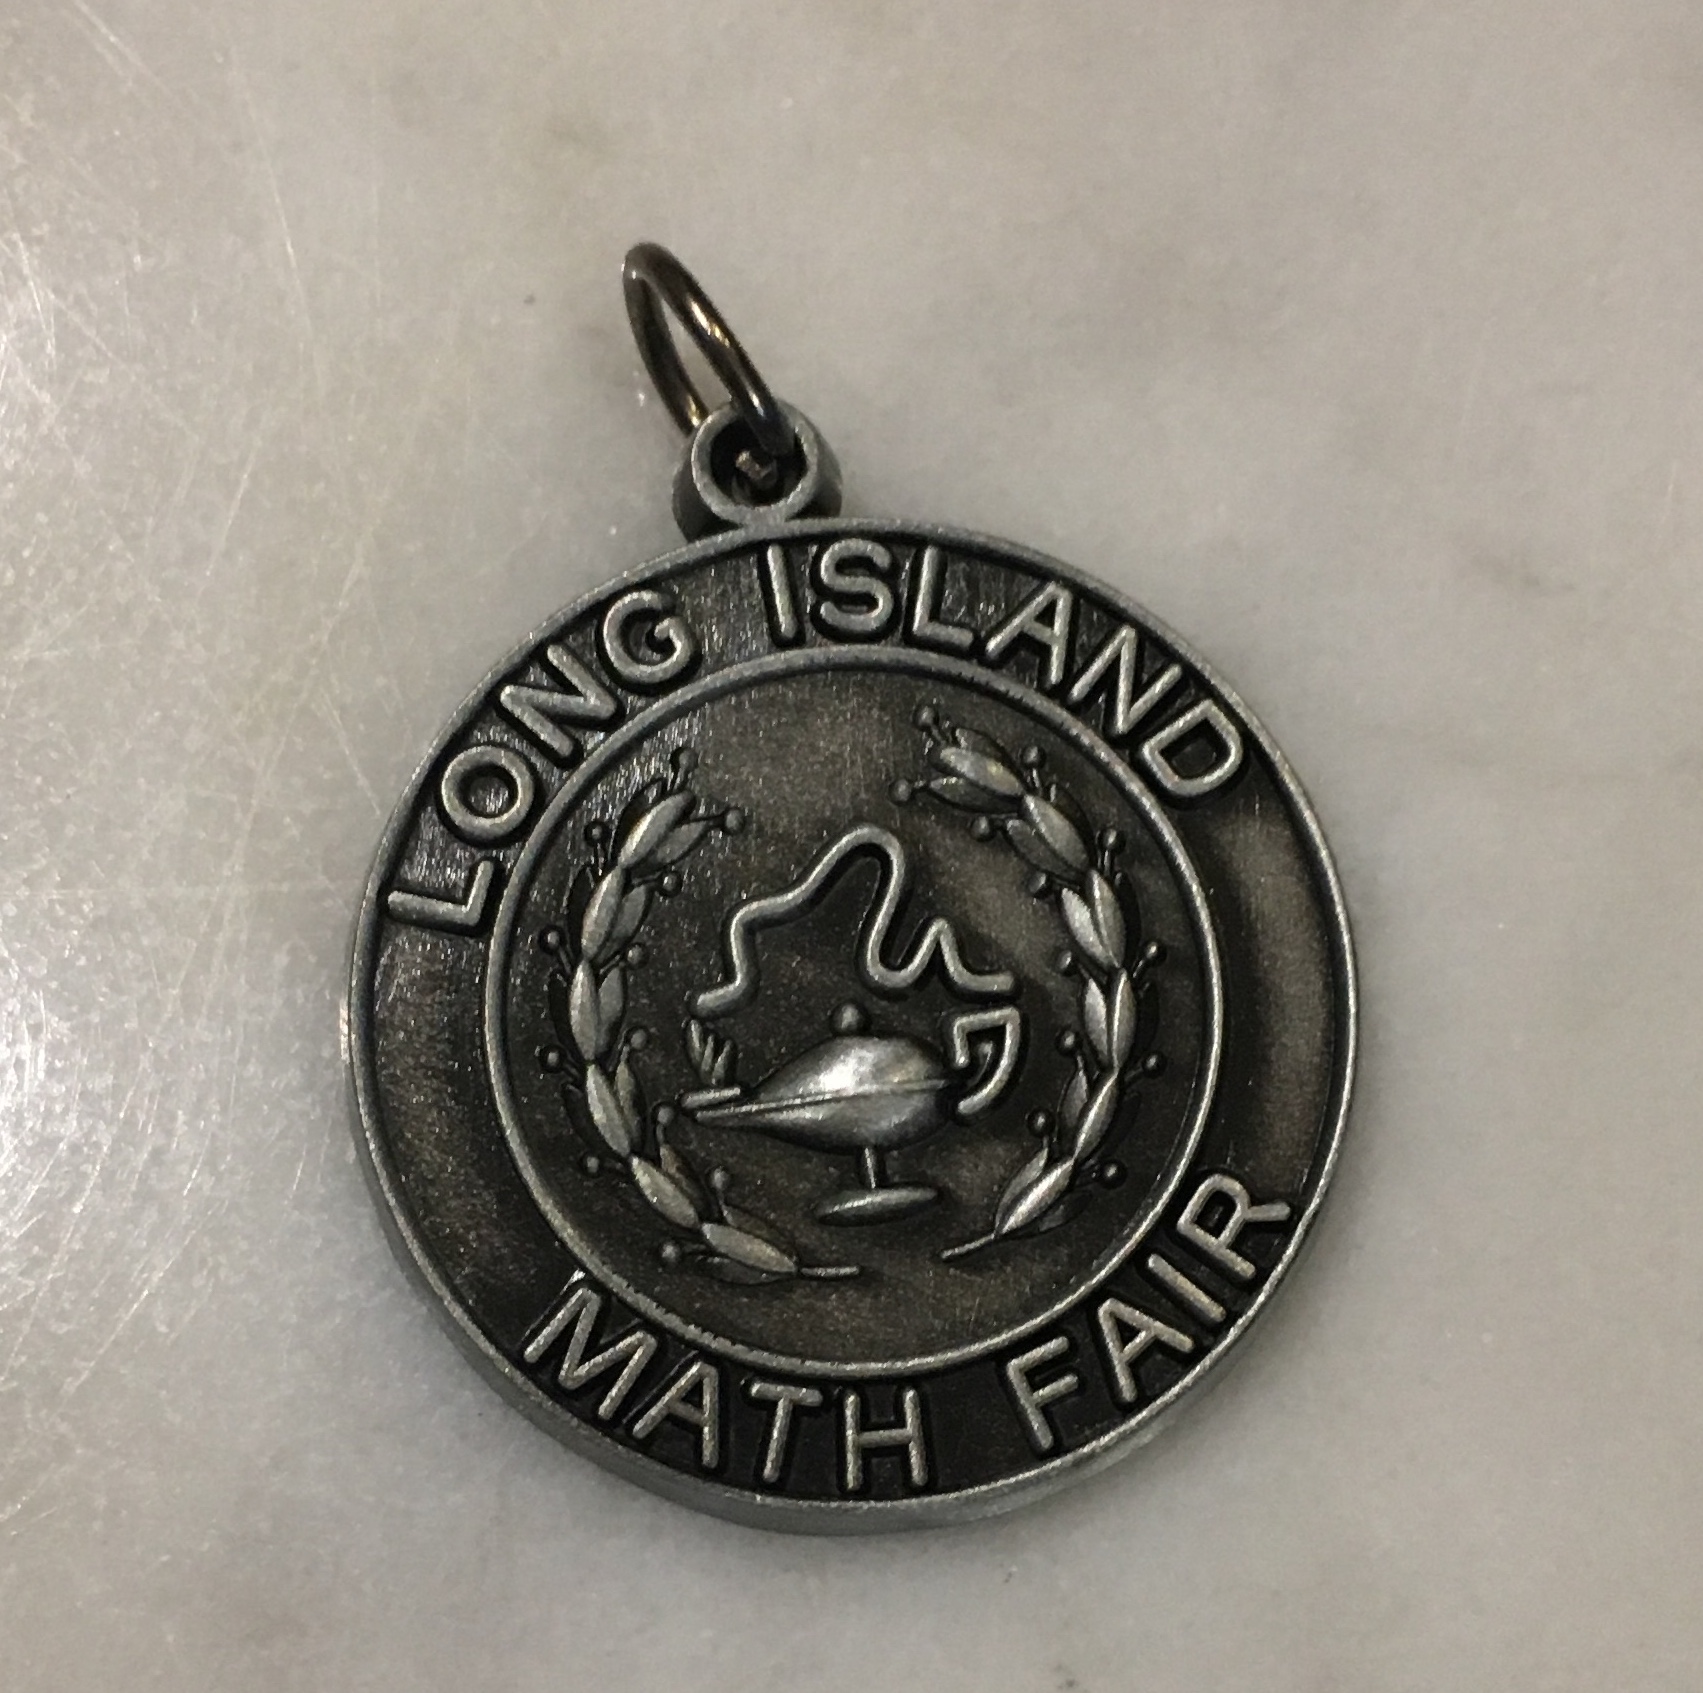 My 2nd place medal from the LI Math Fair final round